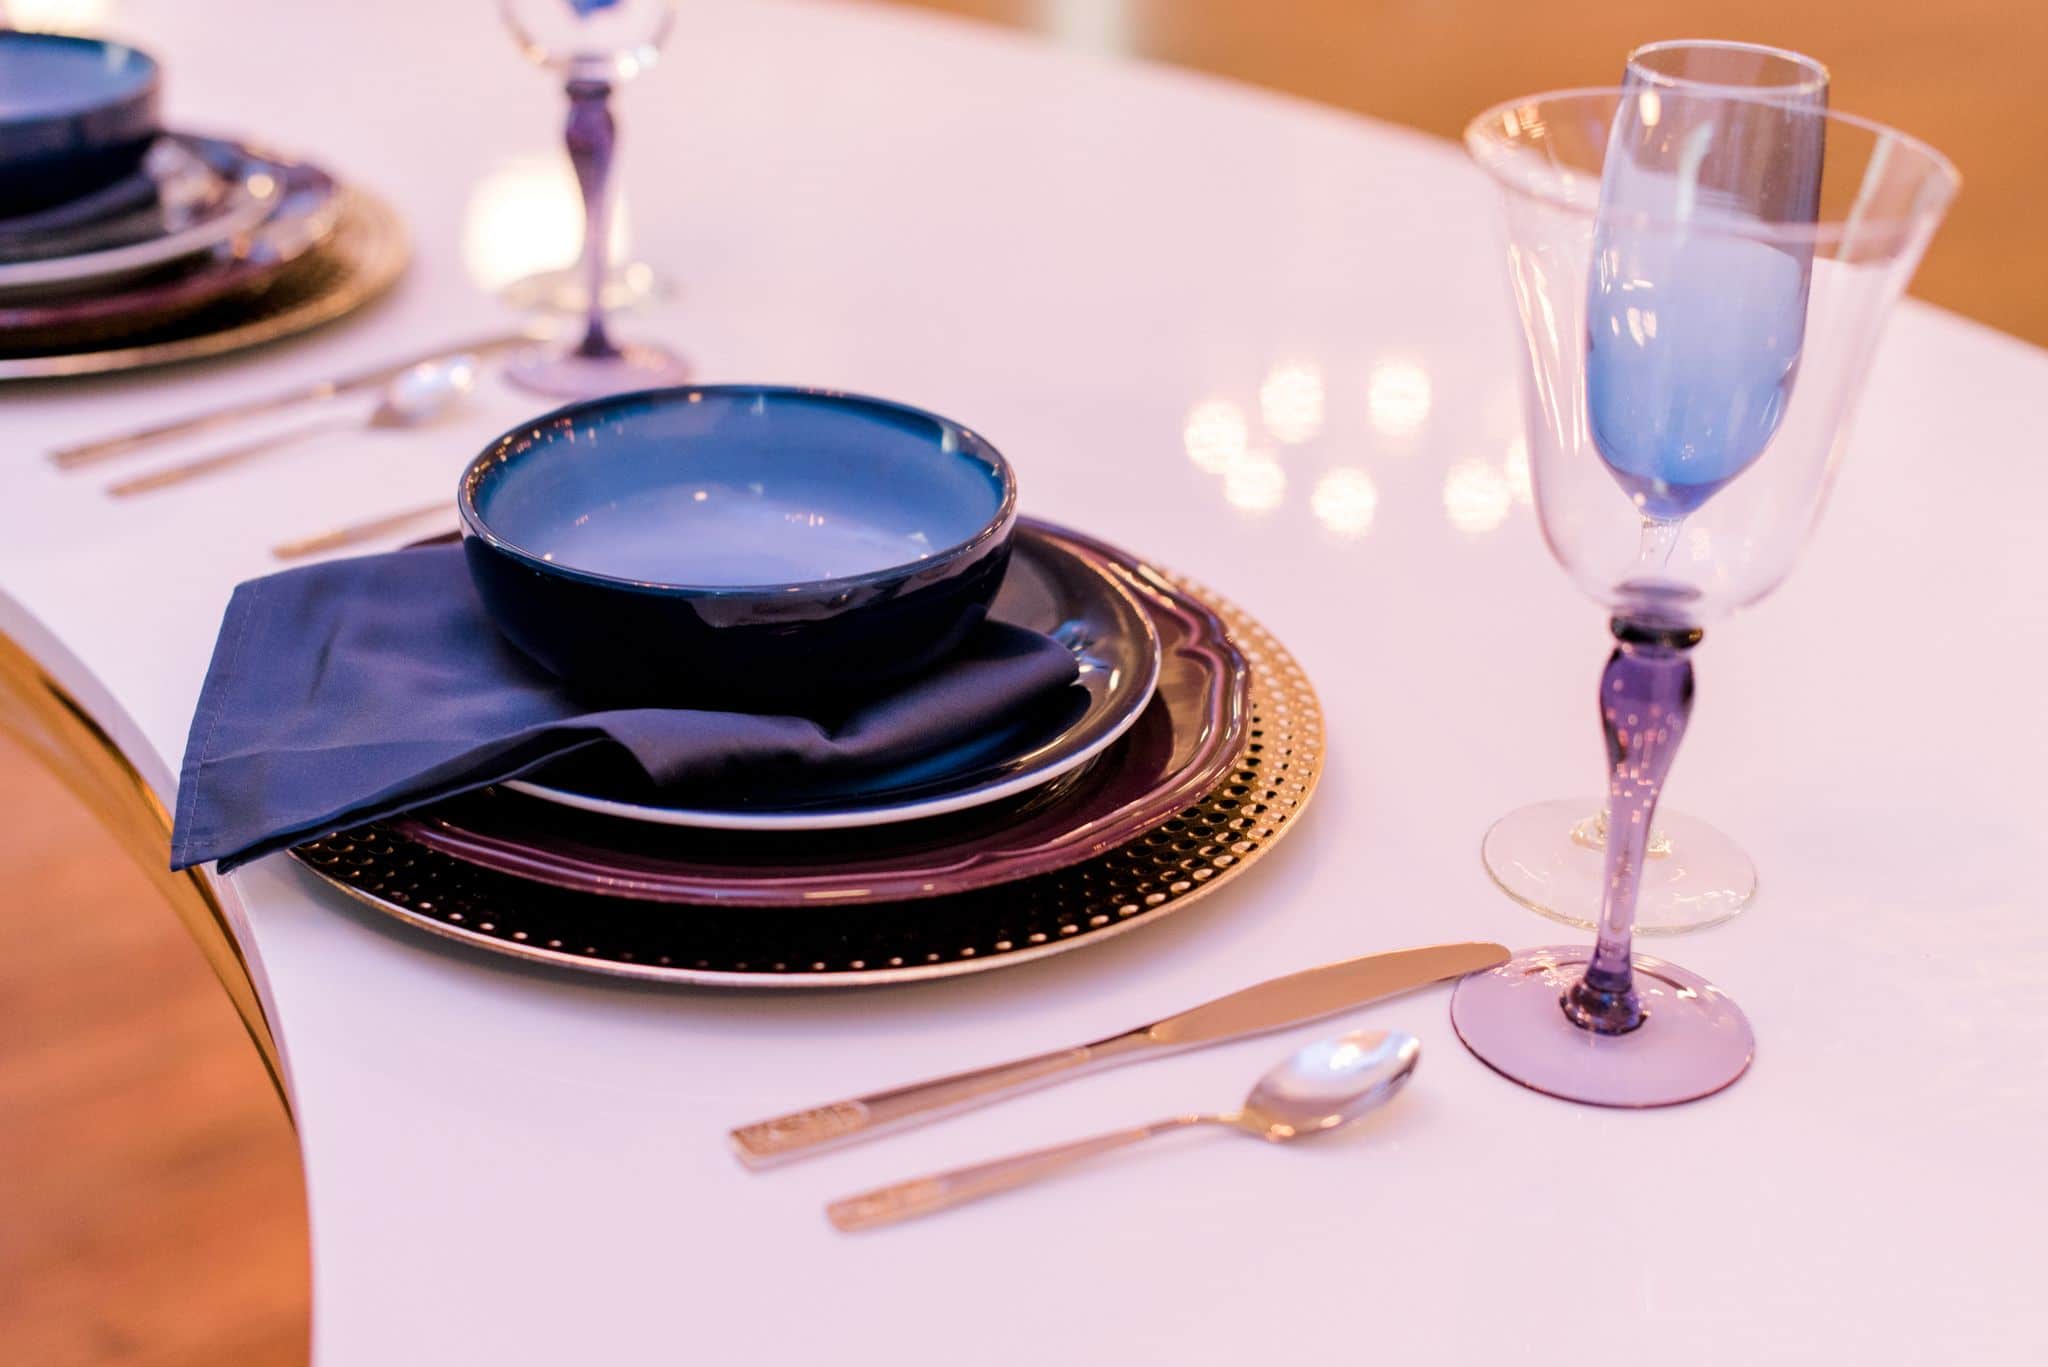 blue and purple tablewear set up for over the moon celestial theme styled wedding shoot